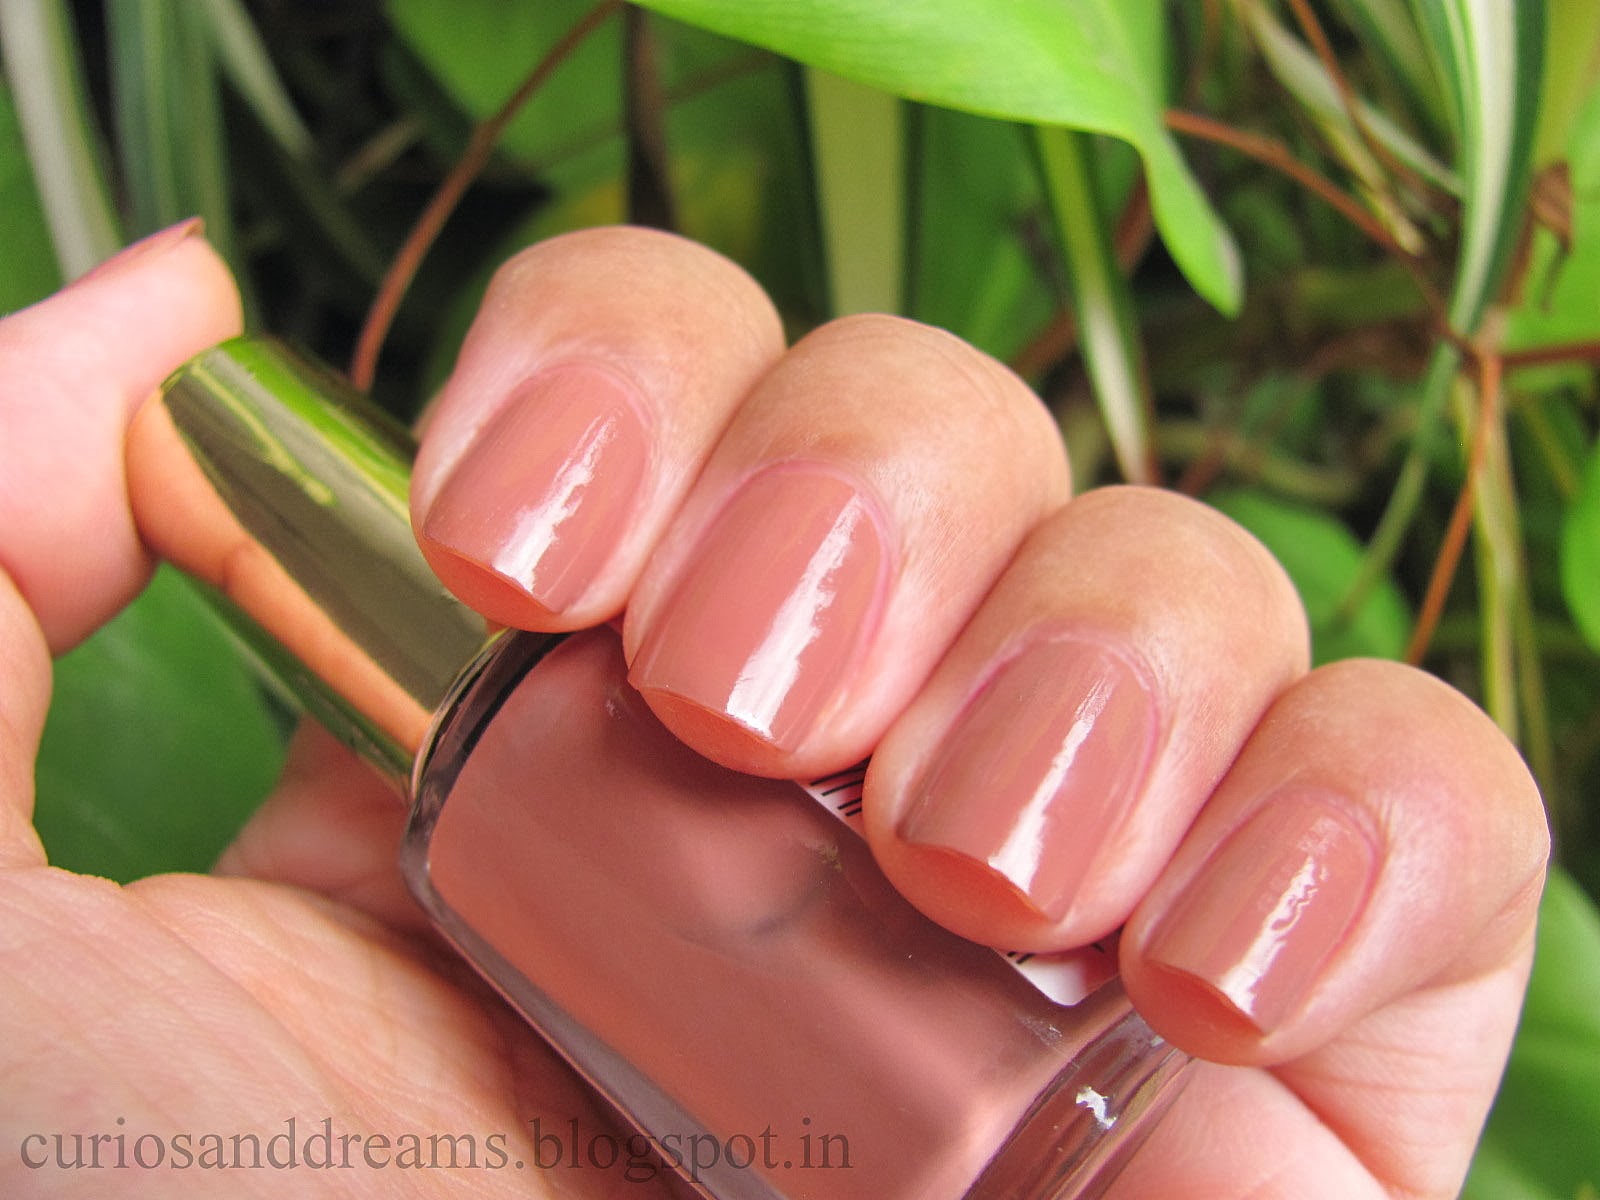 L'Oreal Color Riche Le Vernis Nail Polish Beige Boheme: Review - Curios and  Dreams - Indian Skincare and Beauty